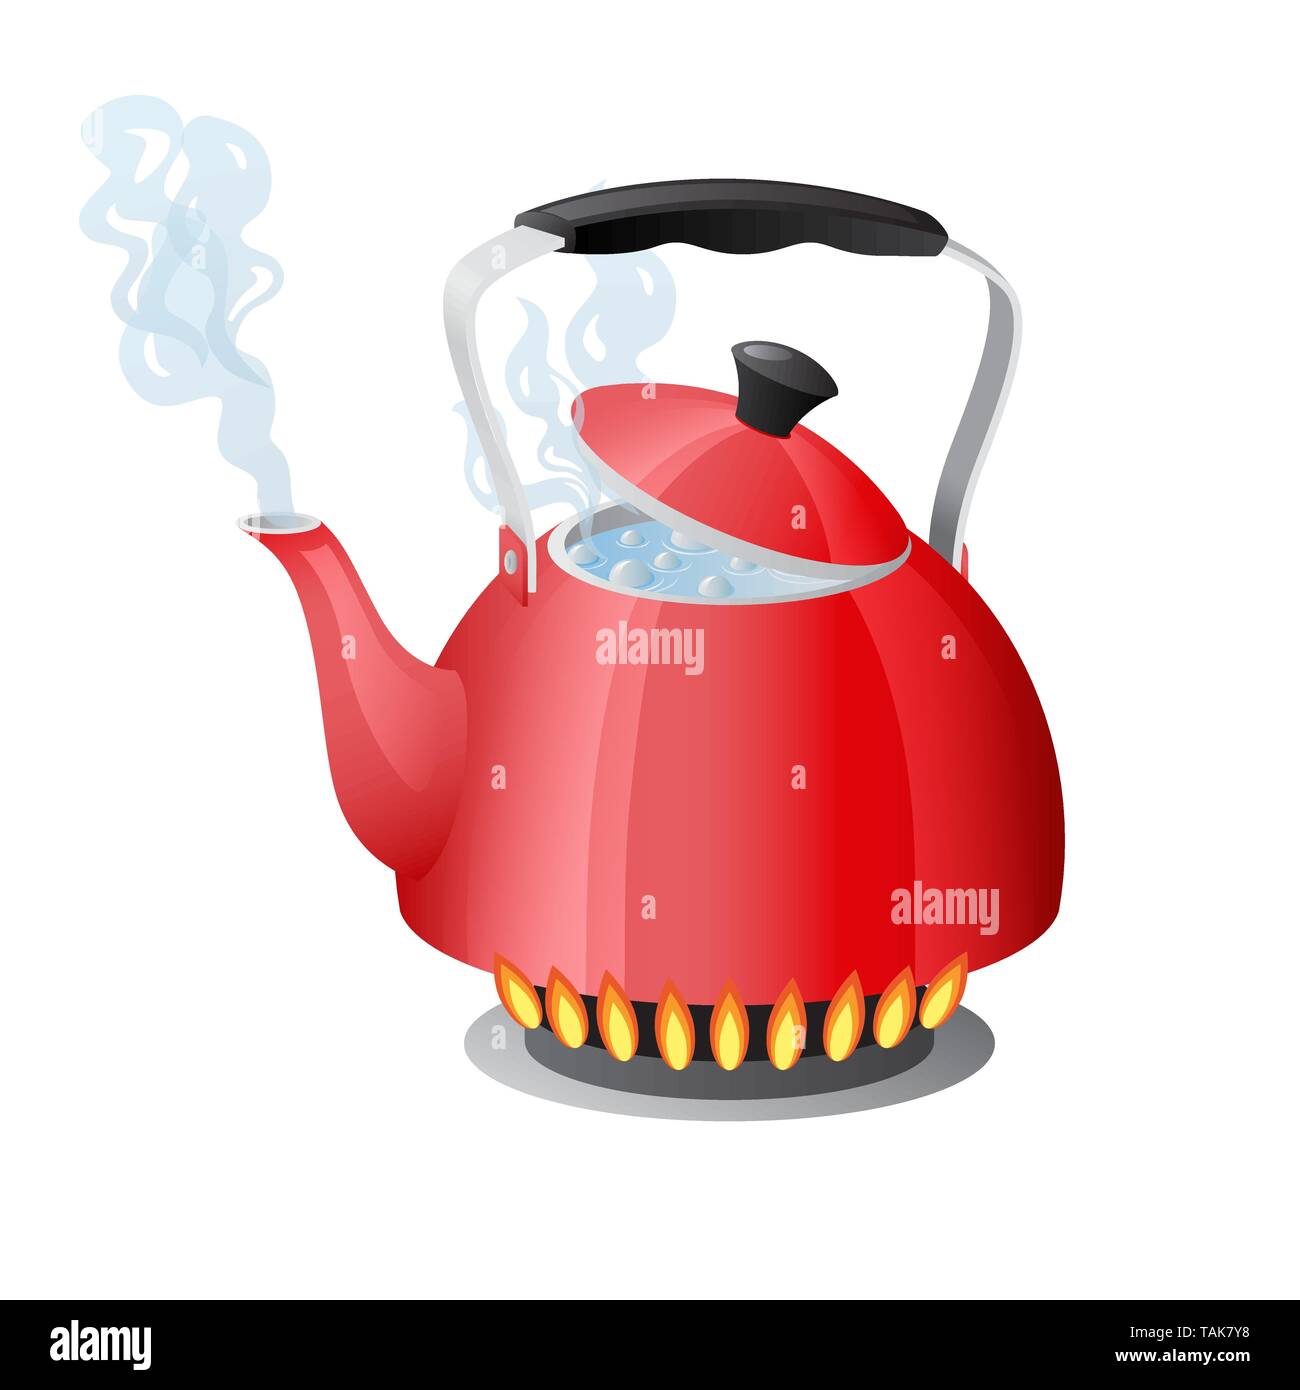 Red kettle with boiling water on kitchen stove flame Stock Vector